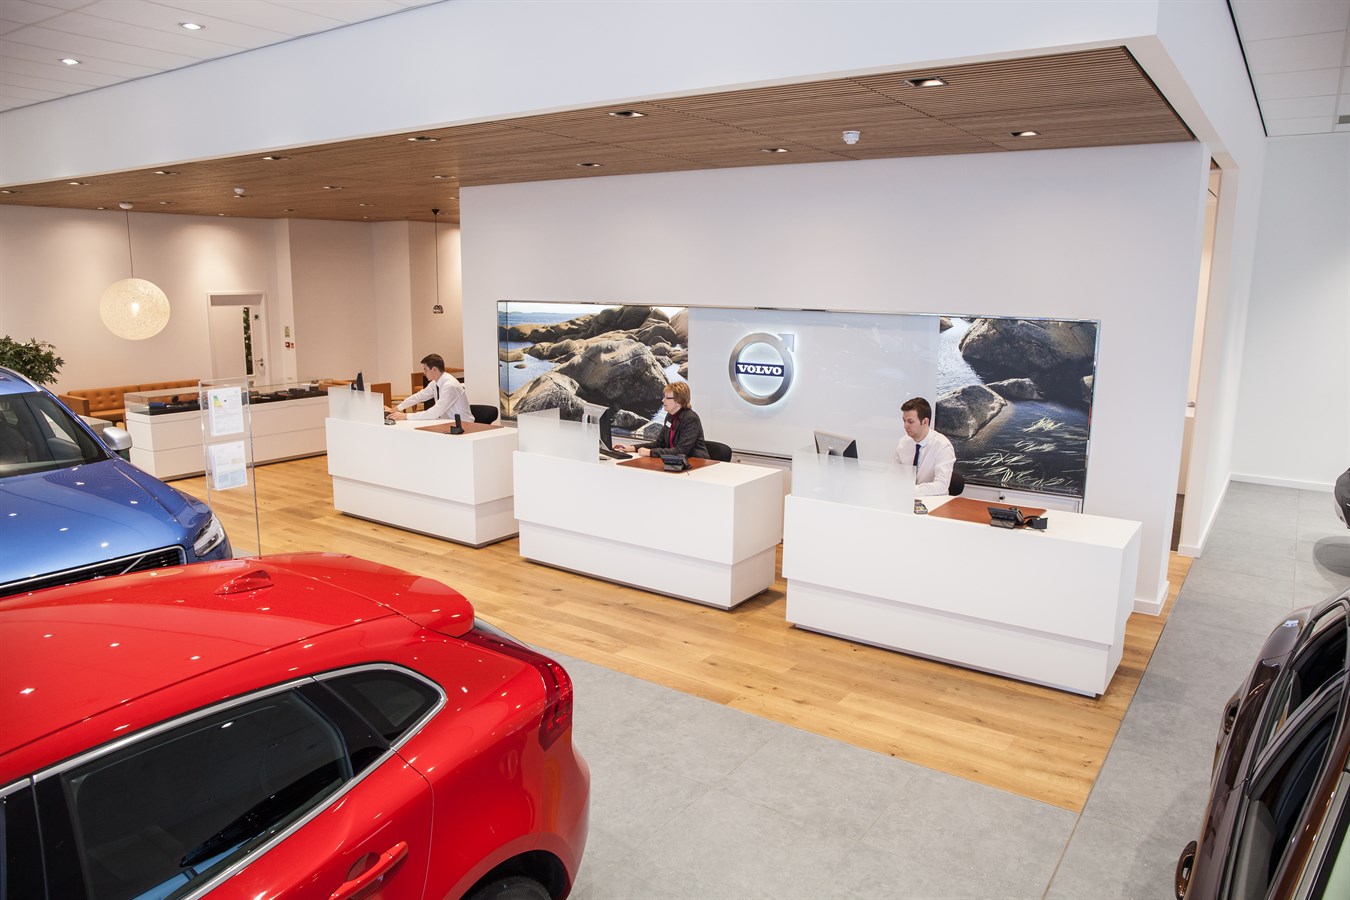 Volvo is investing in the UK motor trade with the launch of its ‘Sponsored Dealer’ programme